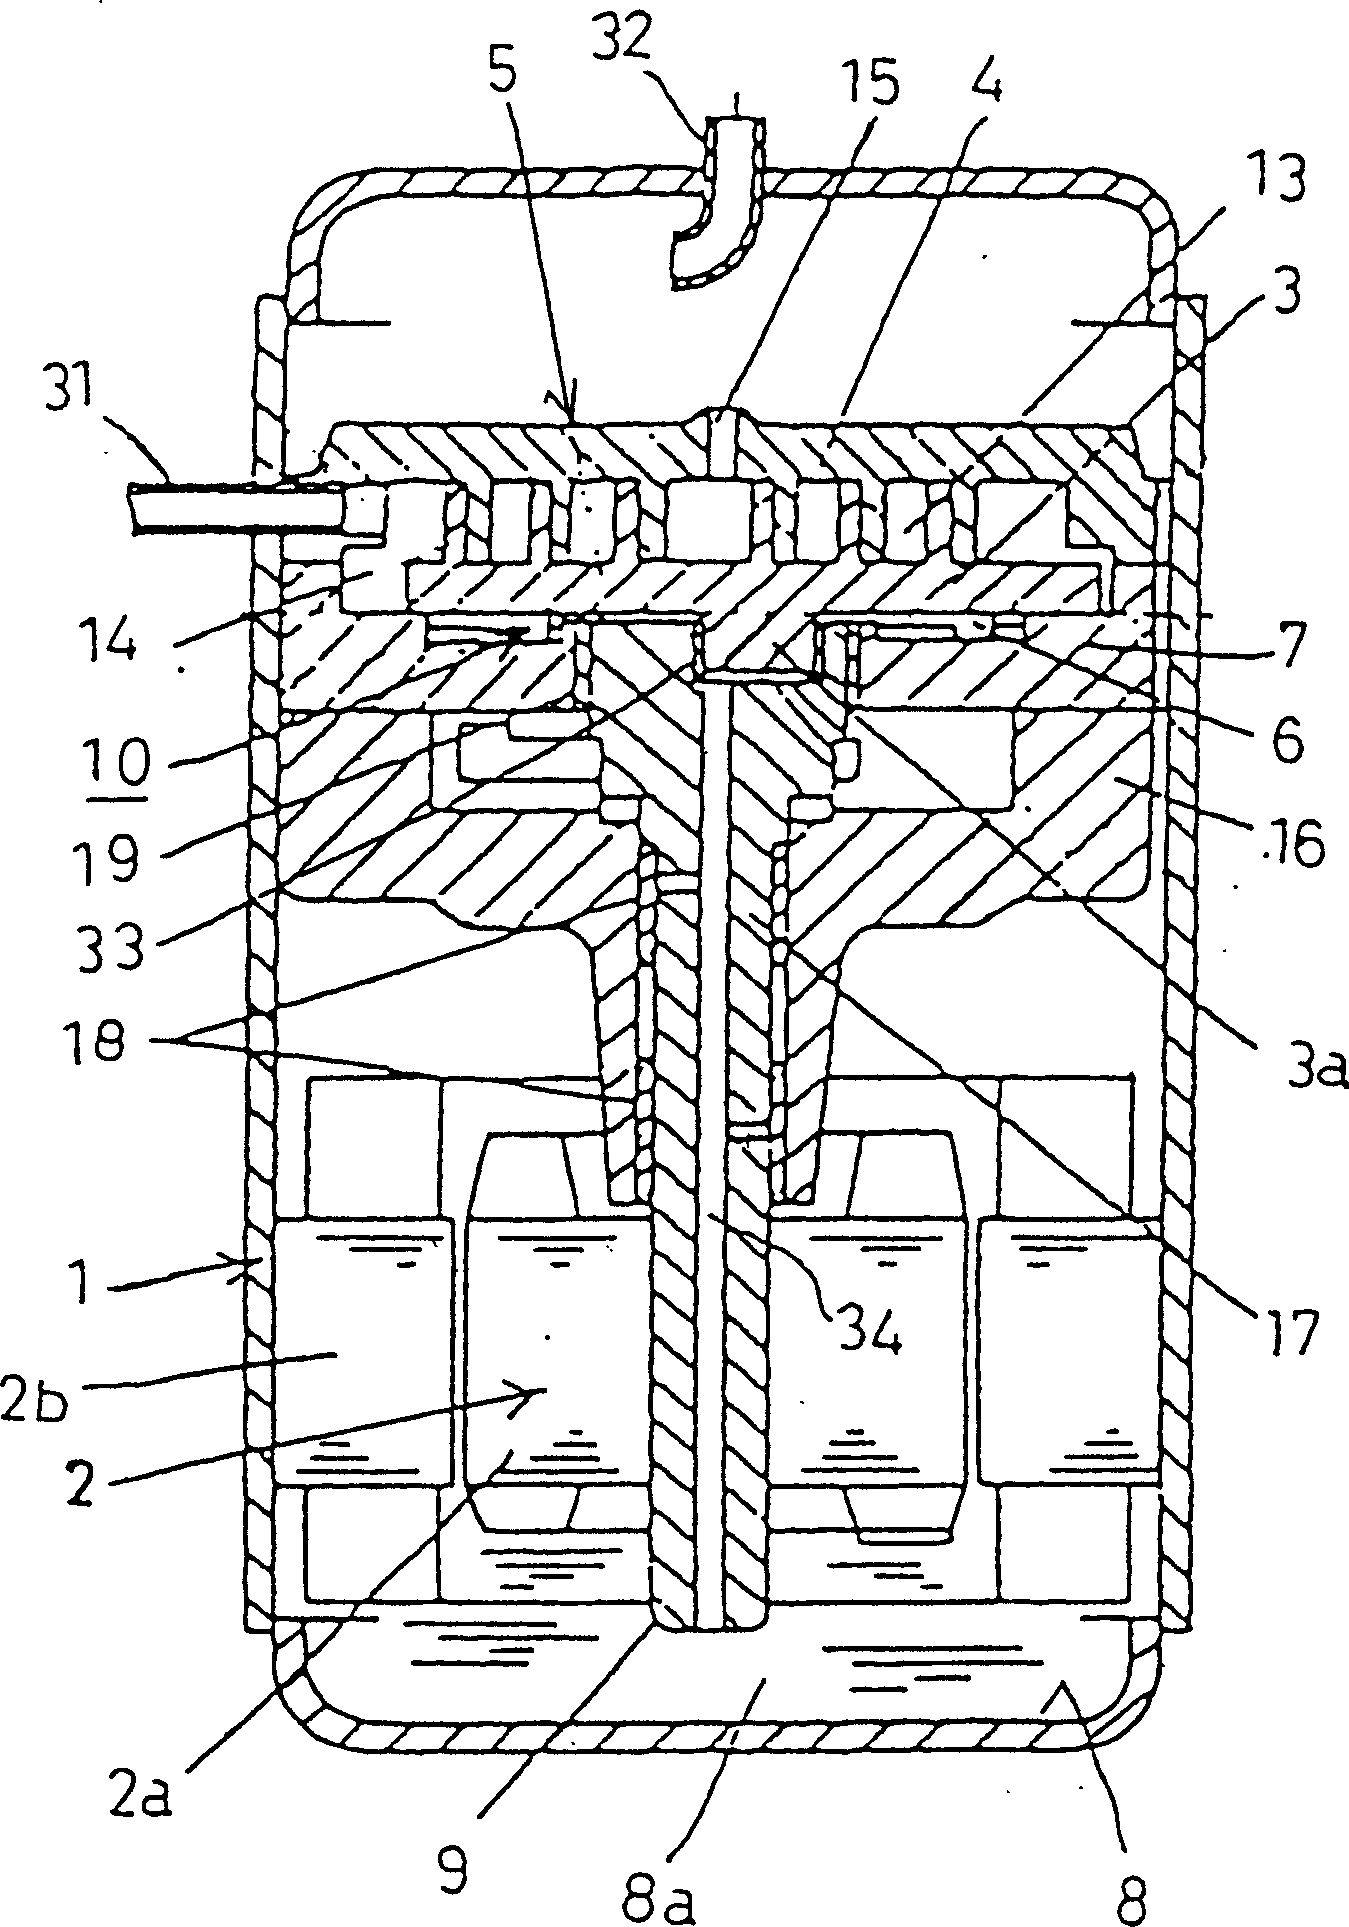 Method for mfg. vortex compressor and its cross ring